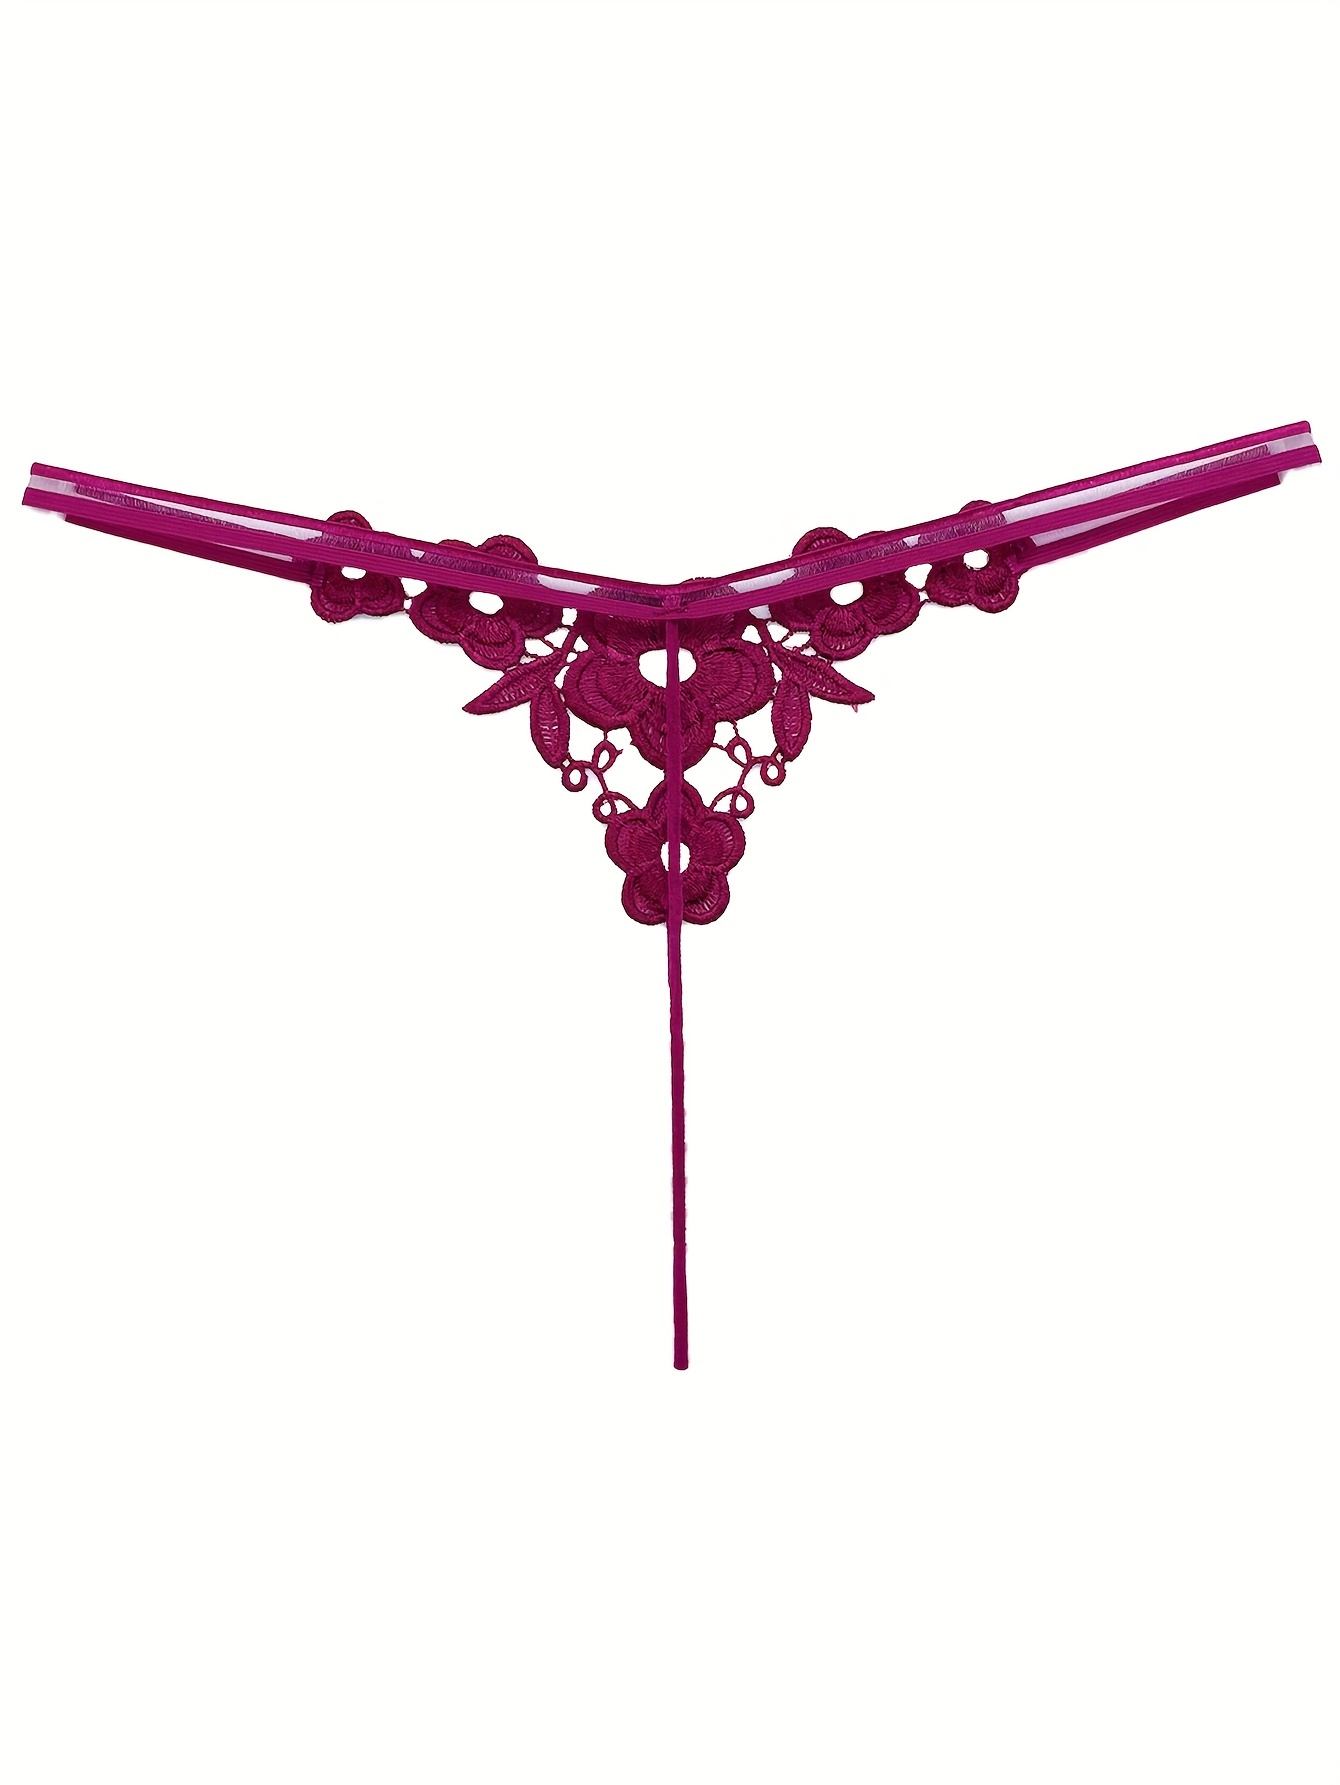 New In Embroidery Pearl Panties Women's Sexy Underwear Lace Bowknot  Breathable G-string Lingerie Stitching Underpants G-string